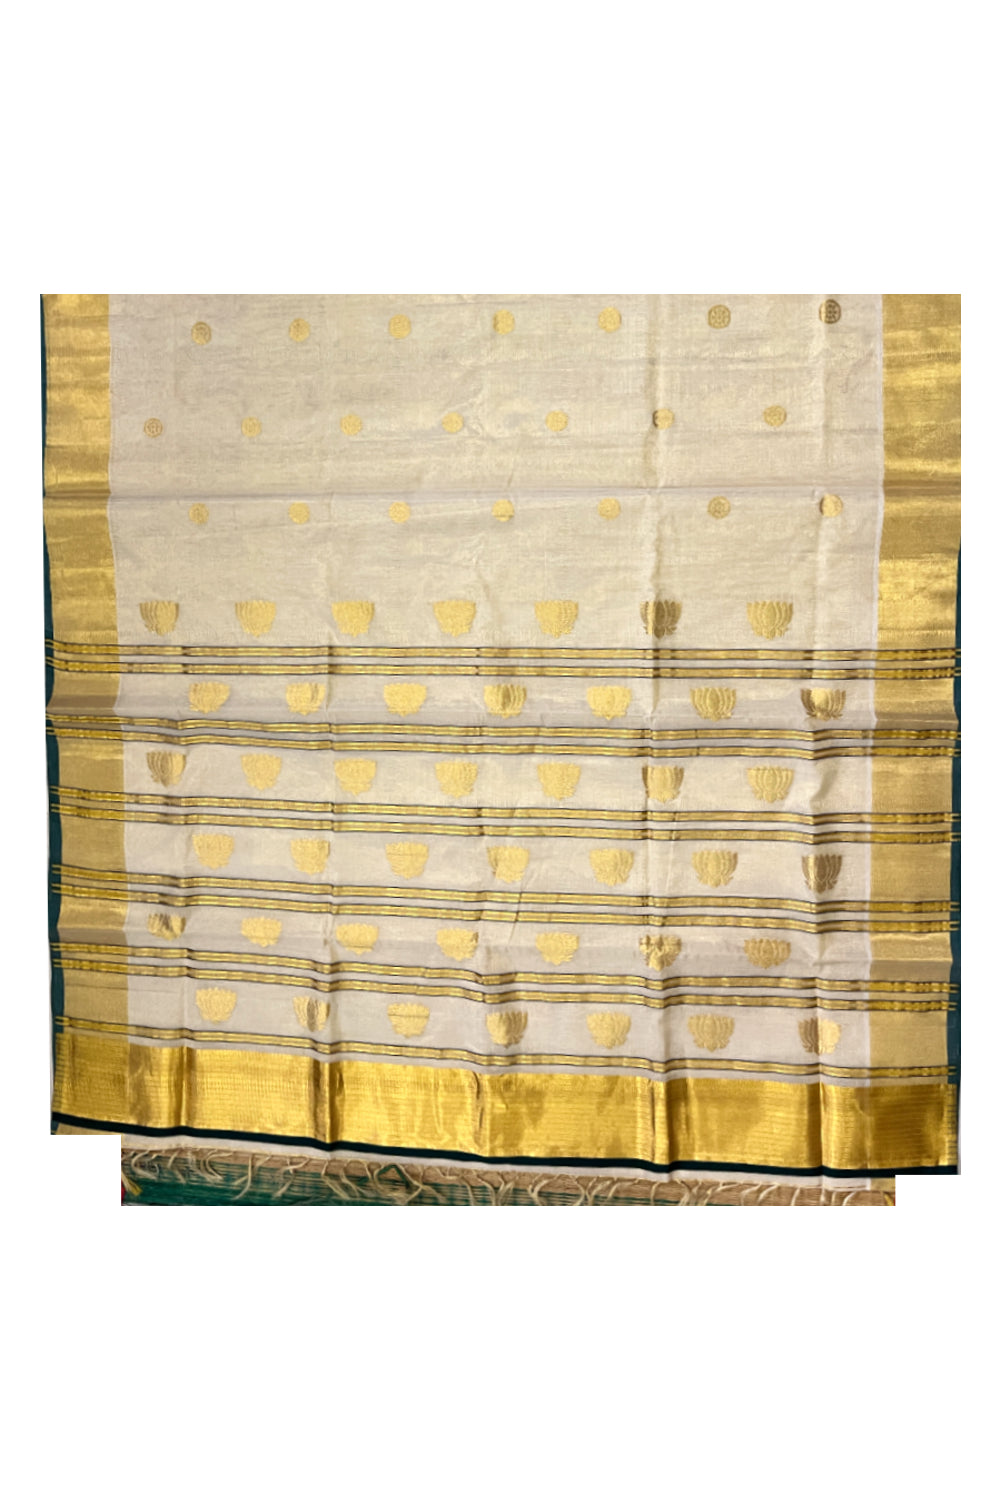 Southloom Premium Handloom Tissue Saree with Golden Lotus Woven Works on Body